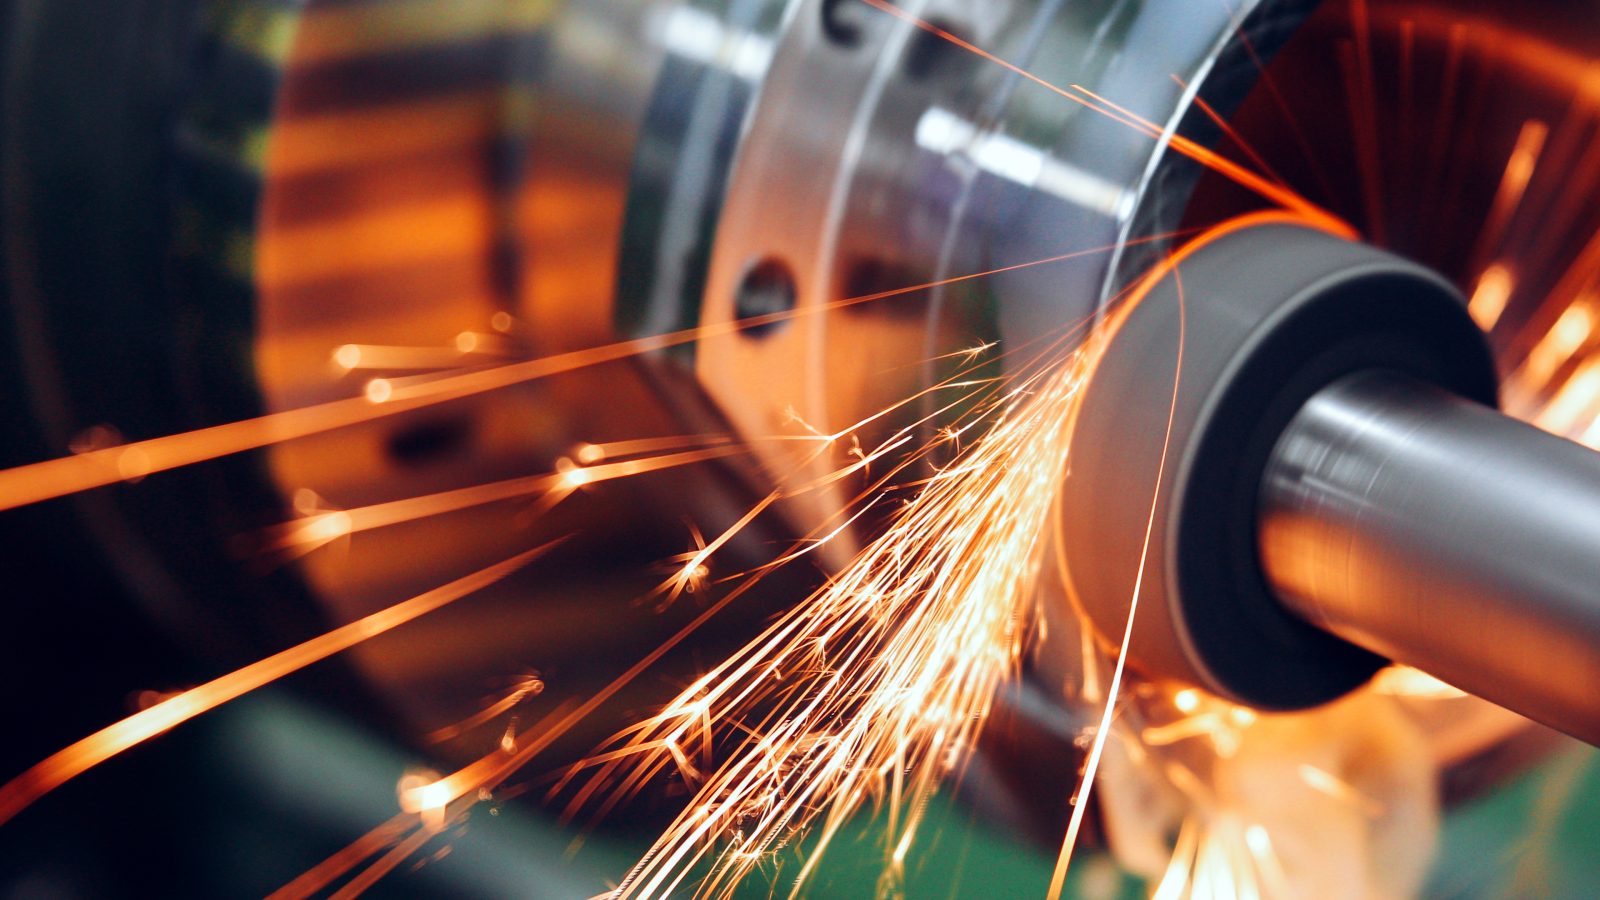 sparks flying while machine griding and finishing metal